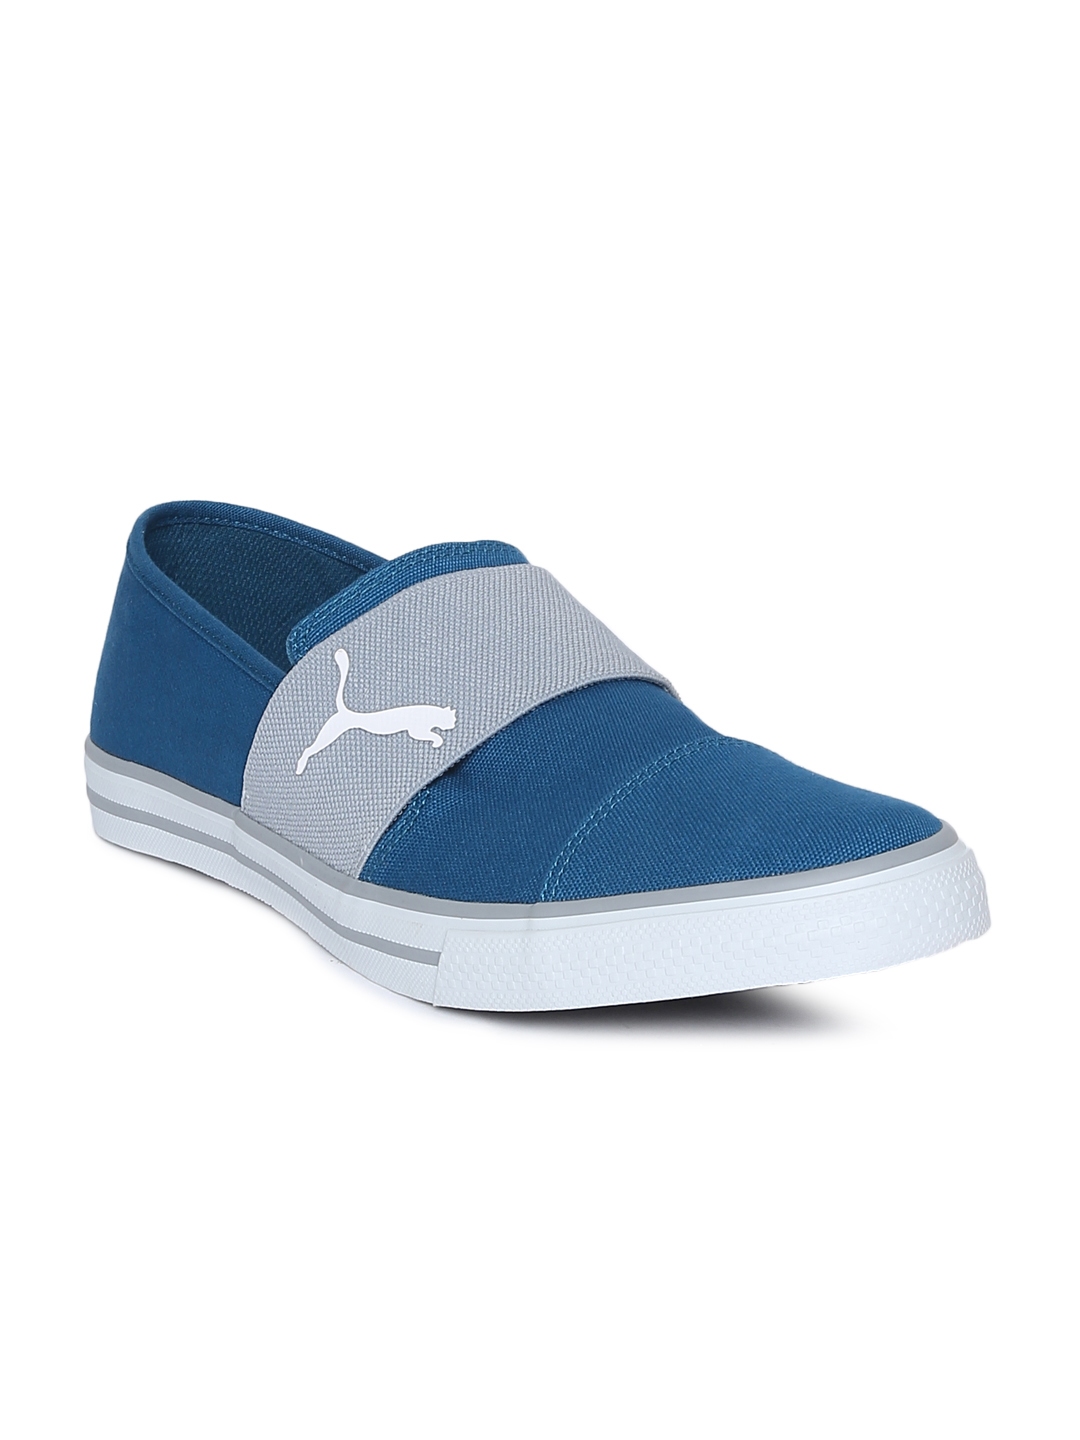 Buy Puma Men Blue Slip On Sneakers - Casual Shoes for Men 7252563 | Myntra